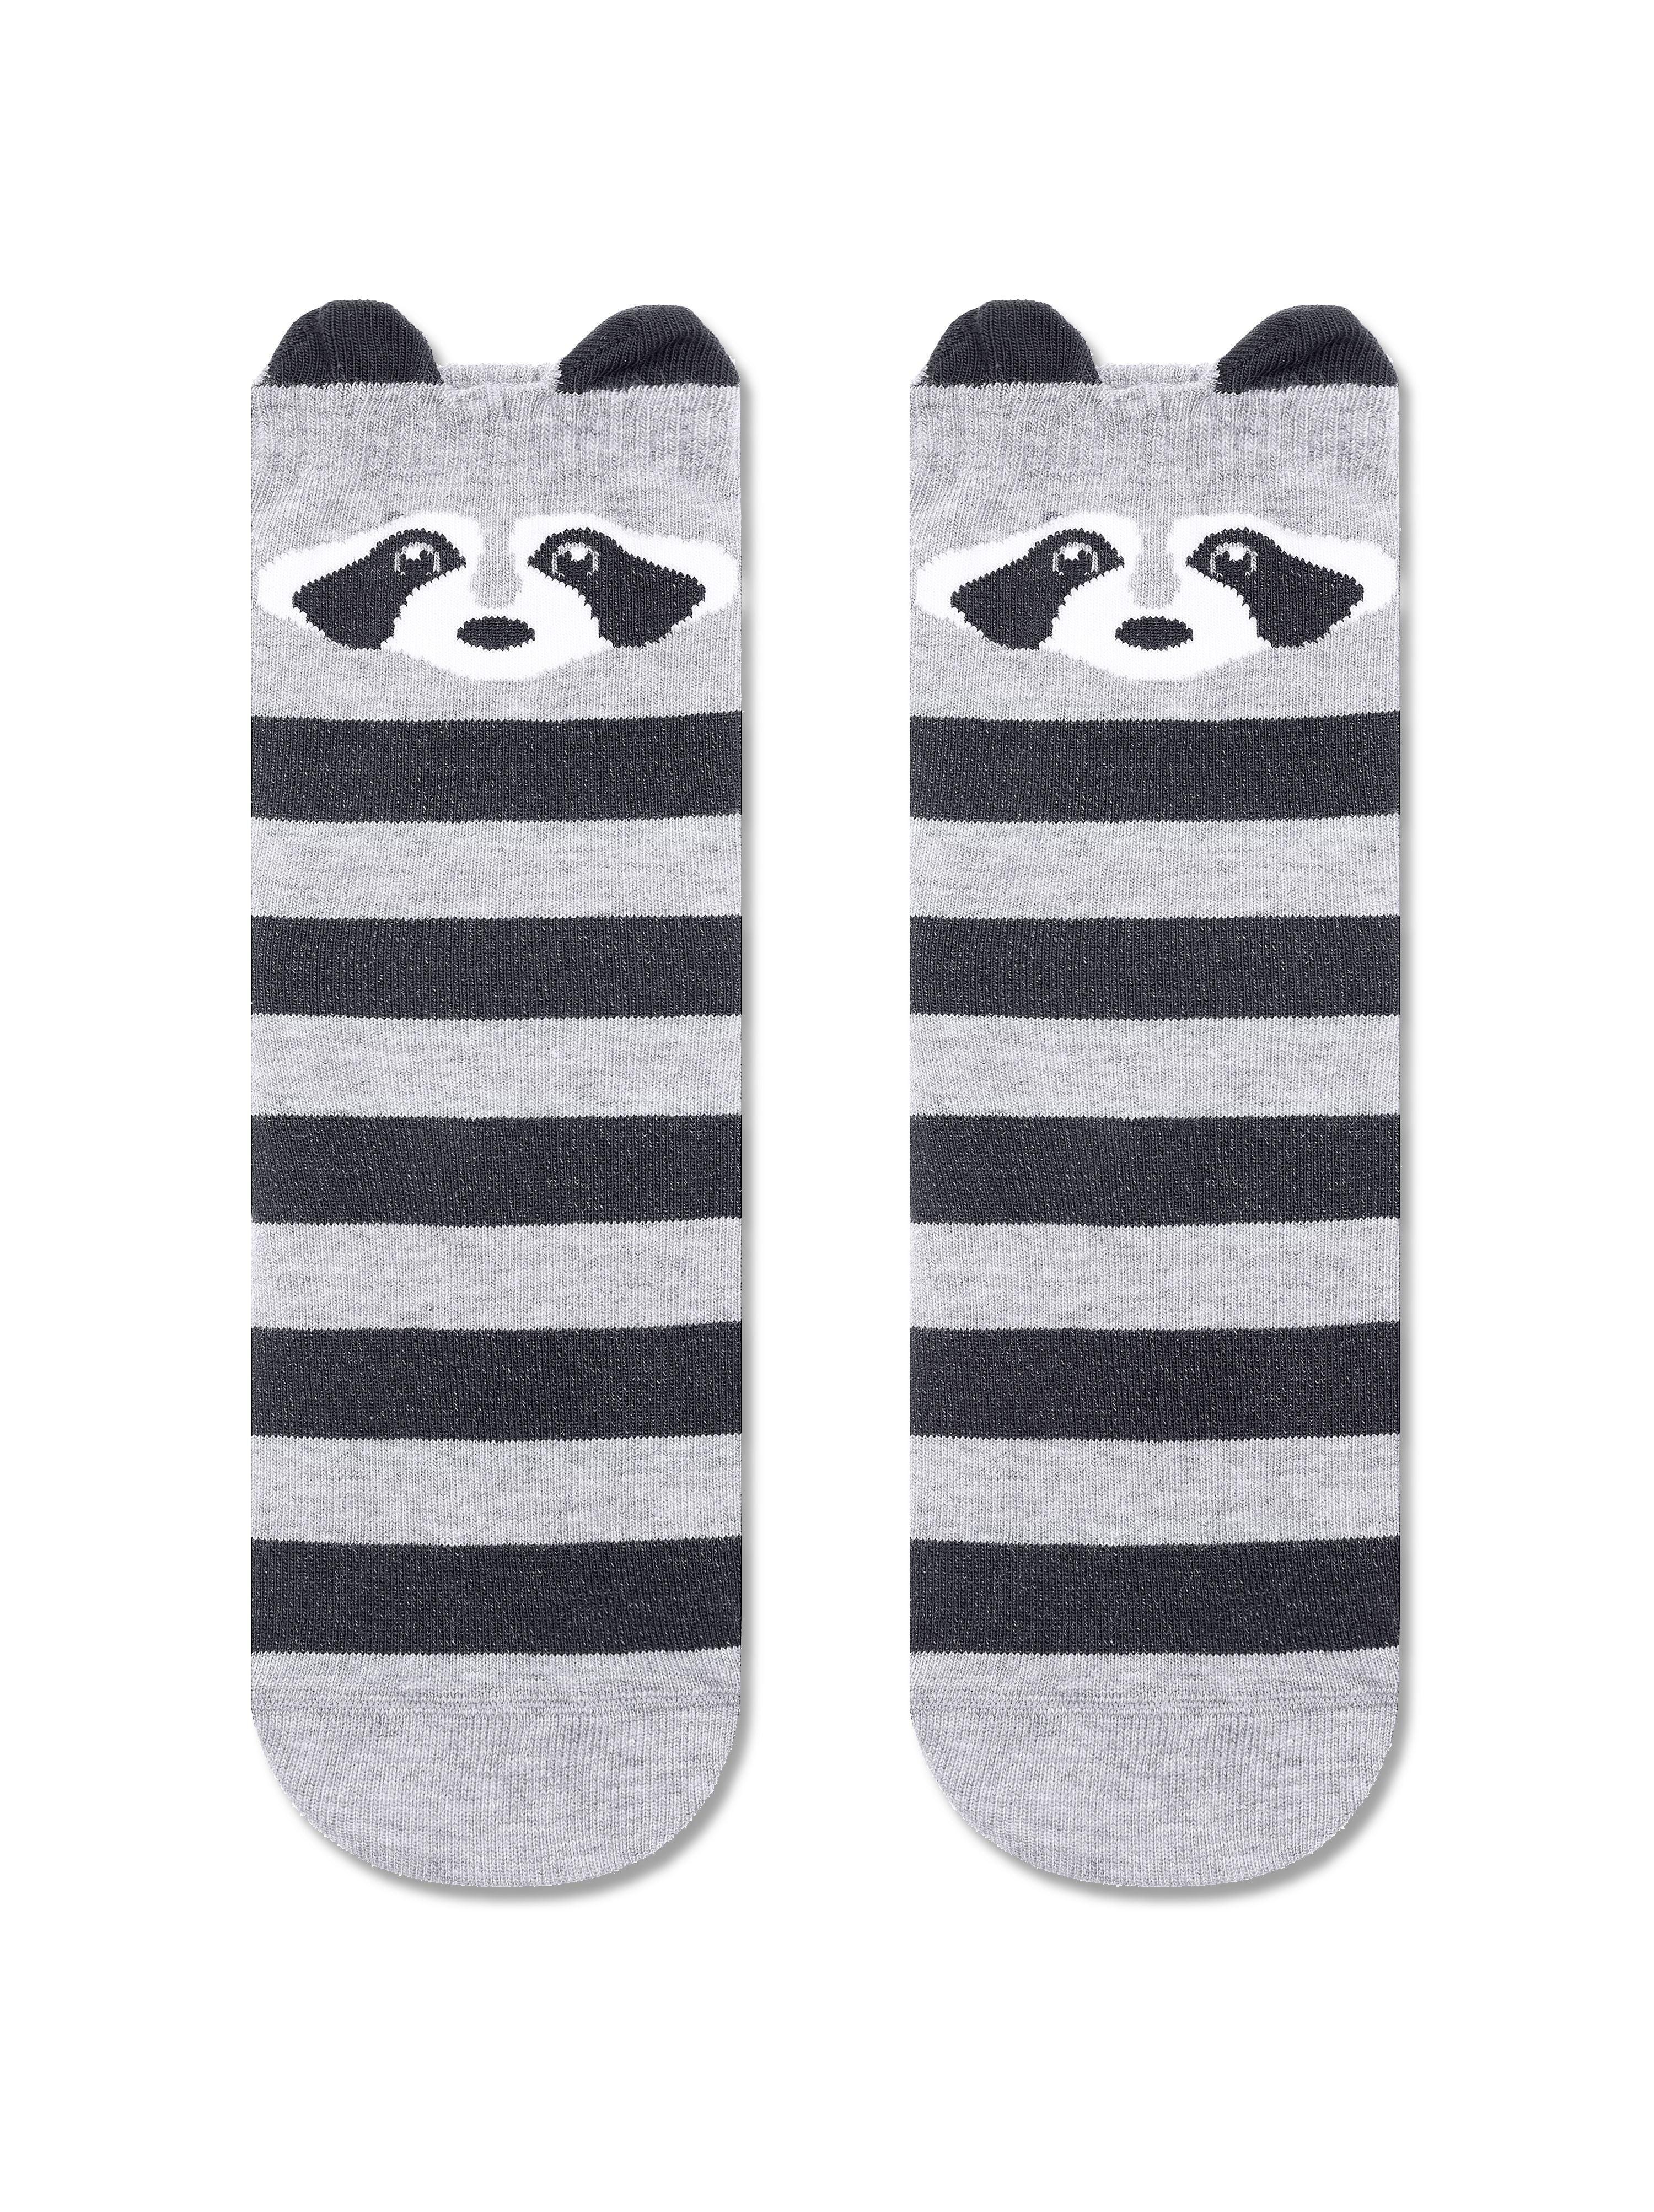 Women's grey cotton socks with raccoon family look by Conte Elegant